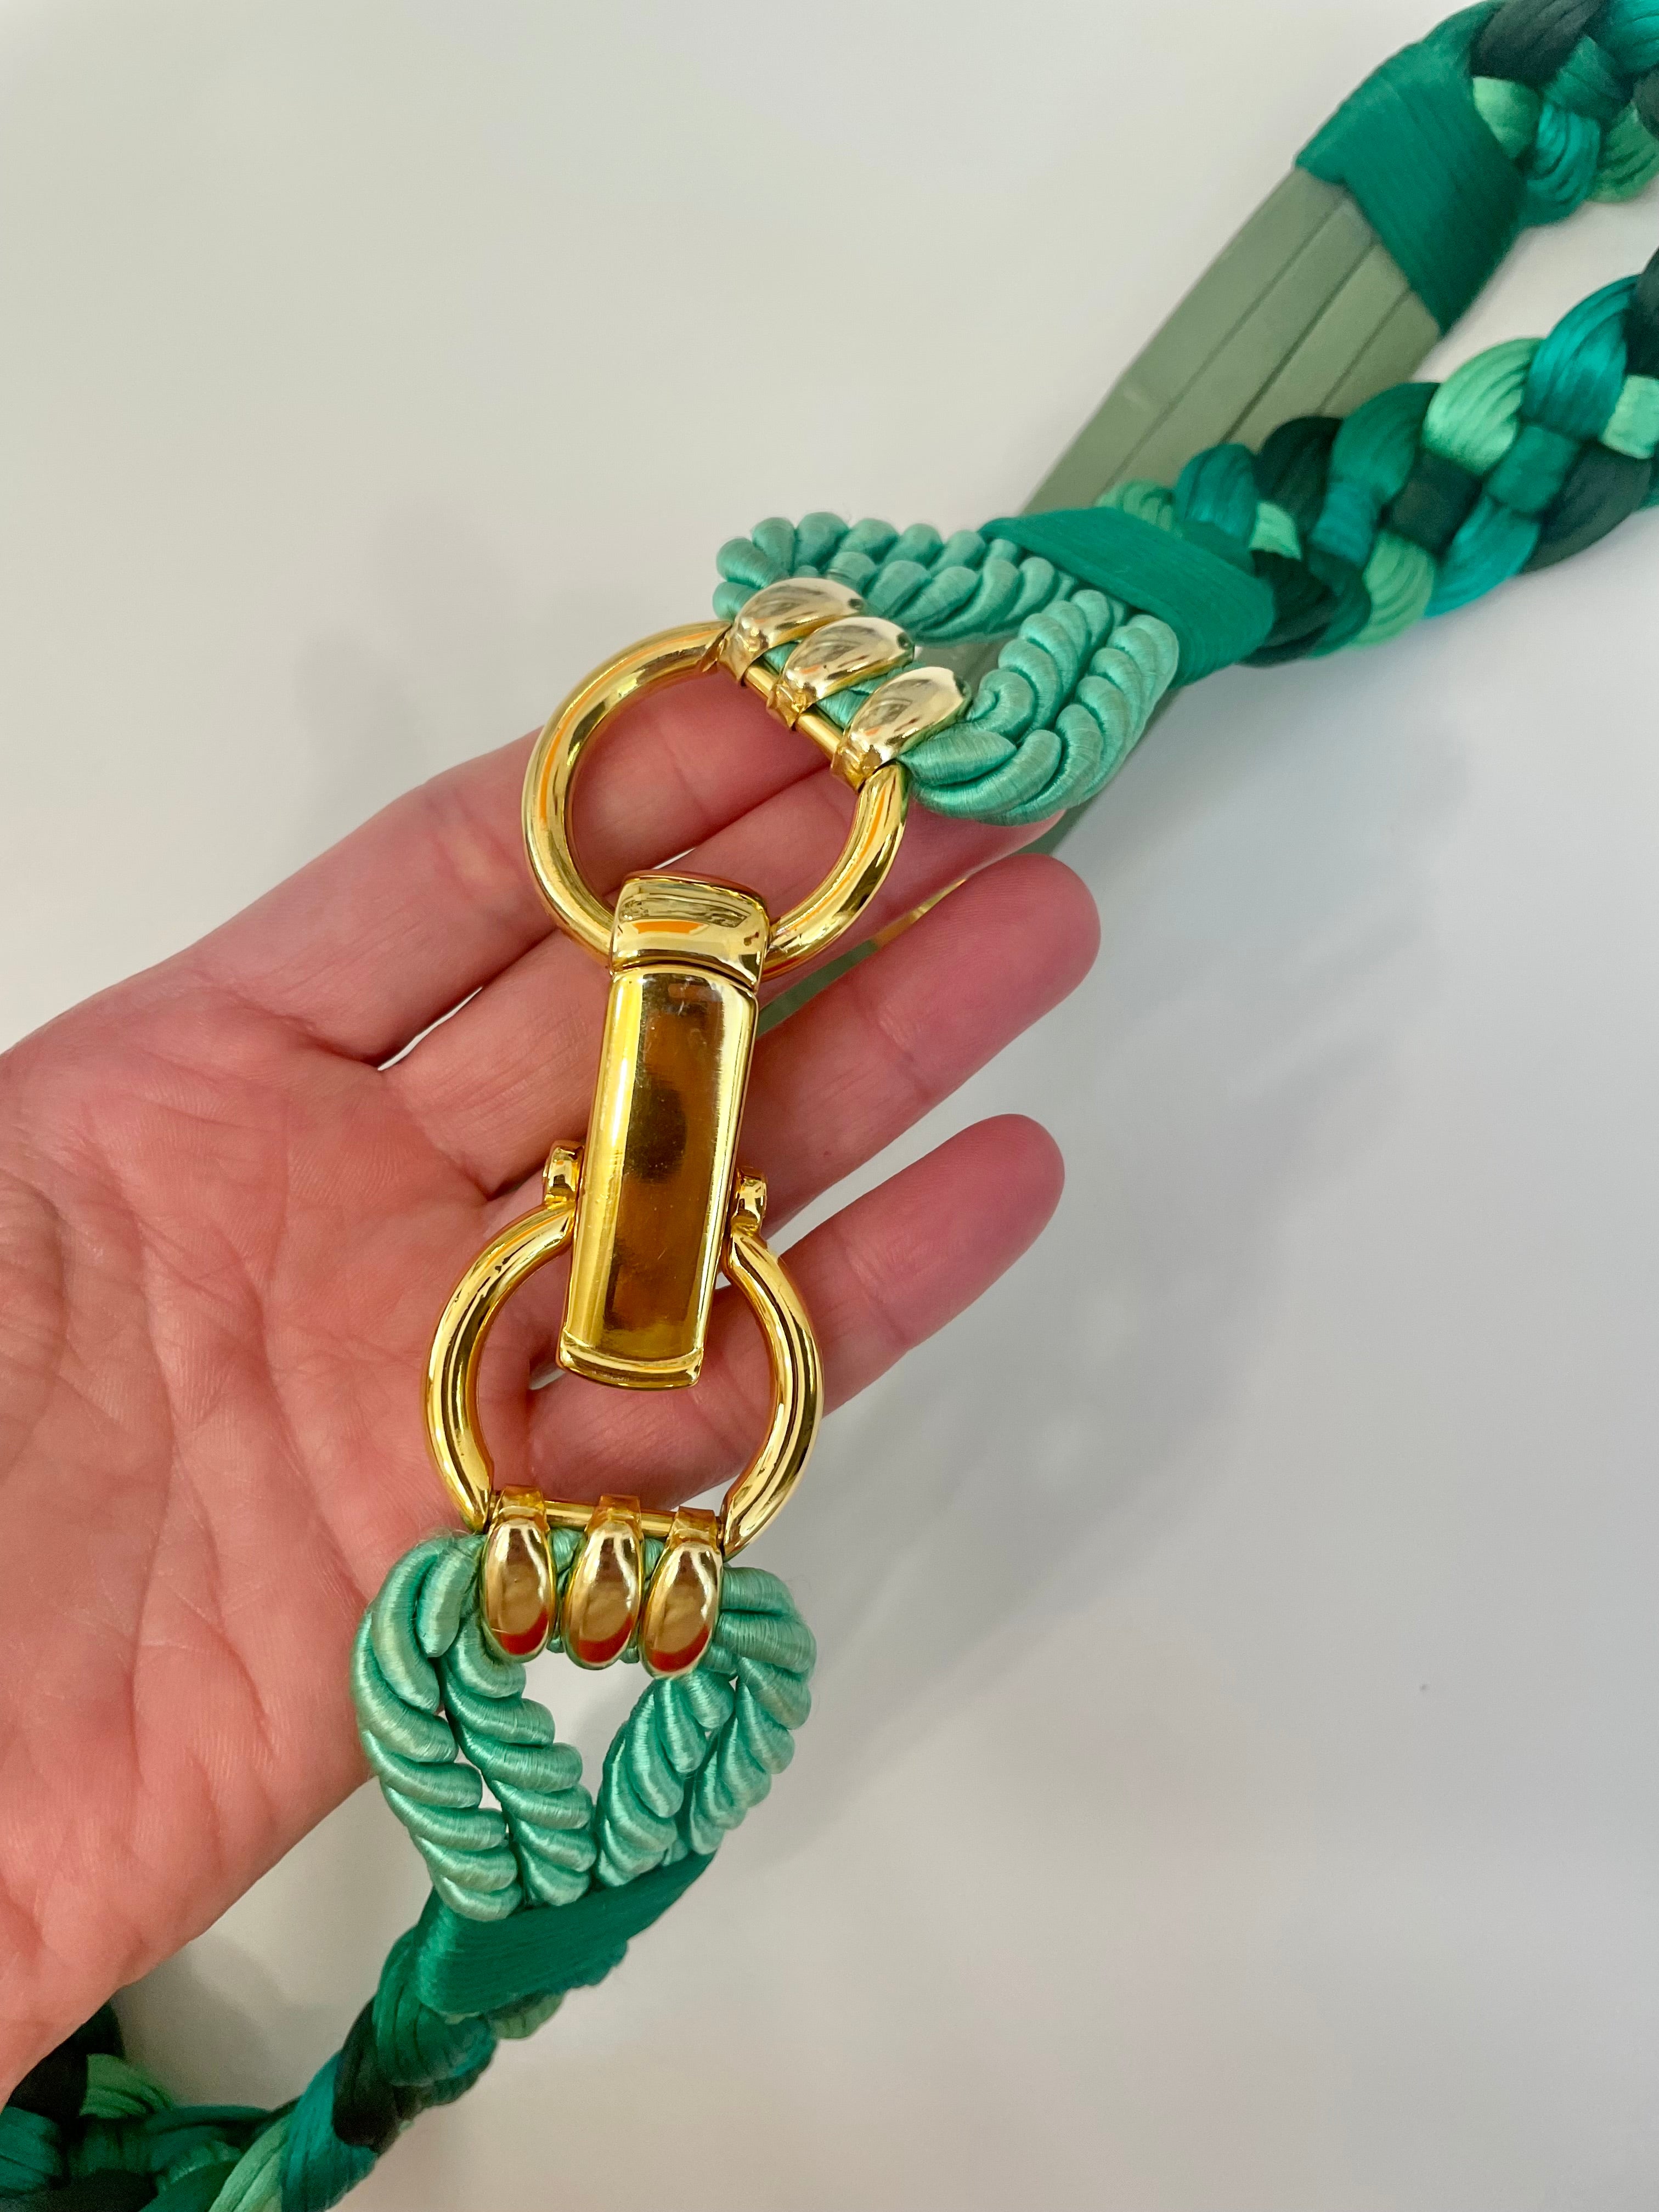 A truly special 1970's belt. I adore this green braided design... oh so chic.